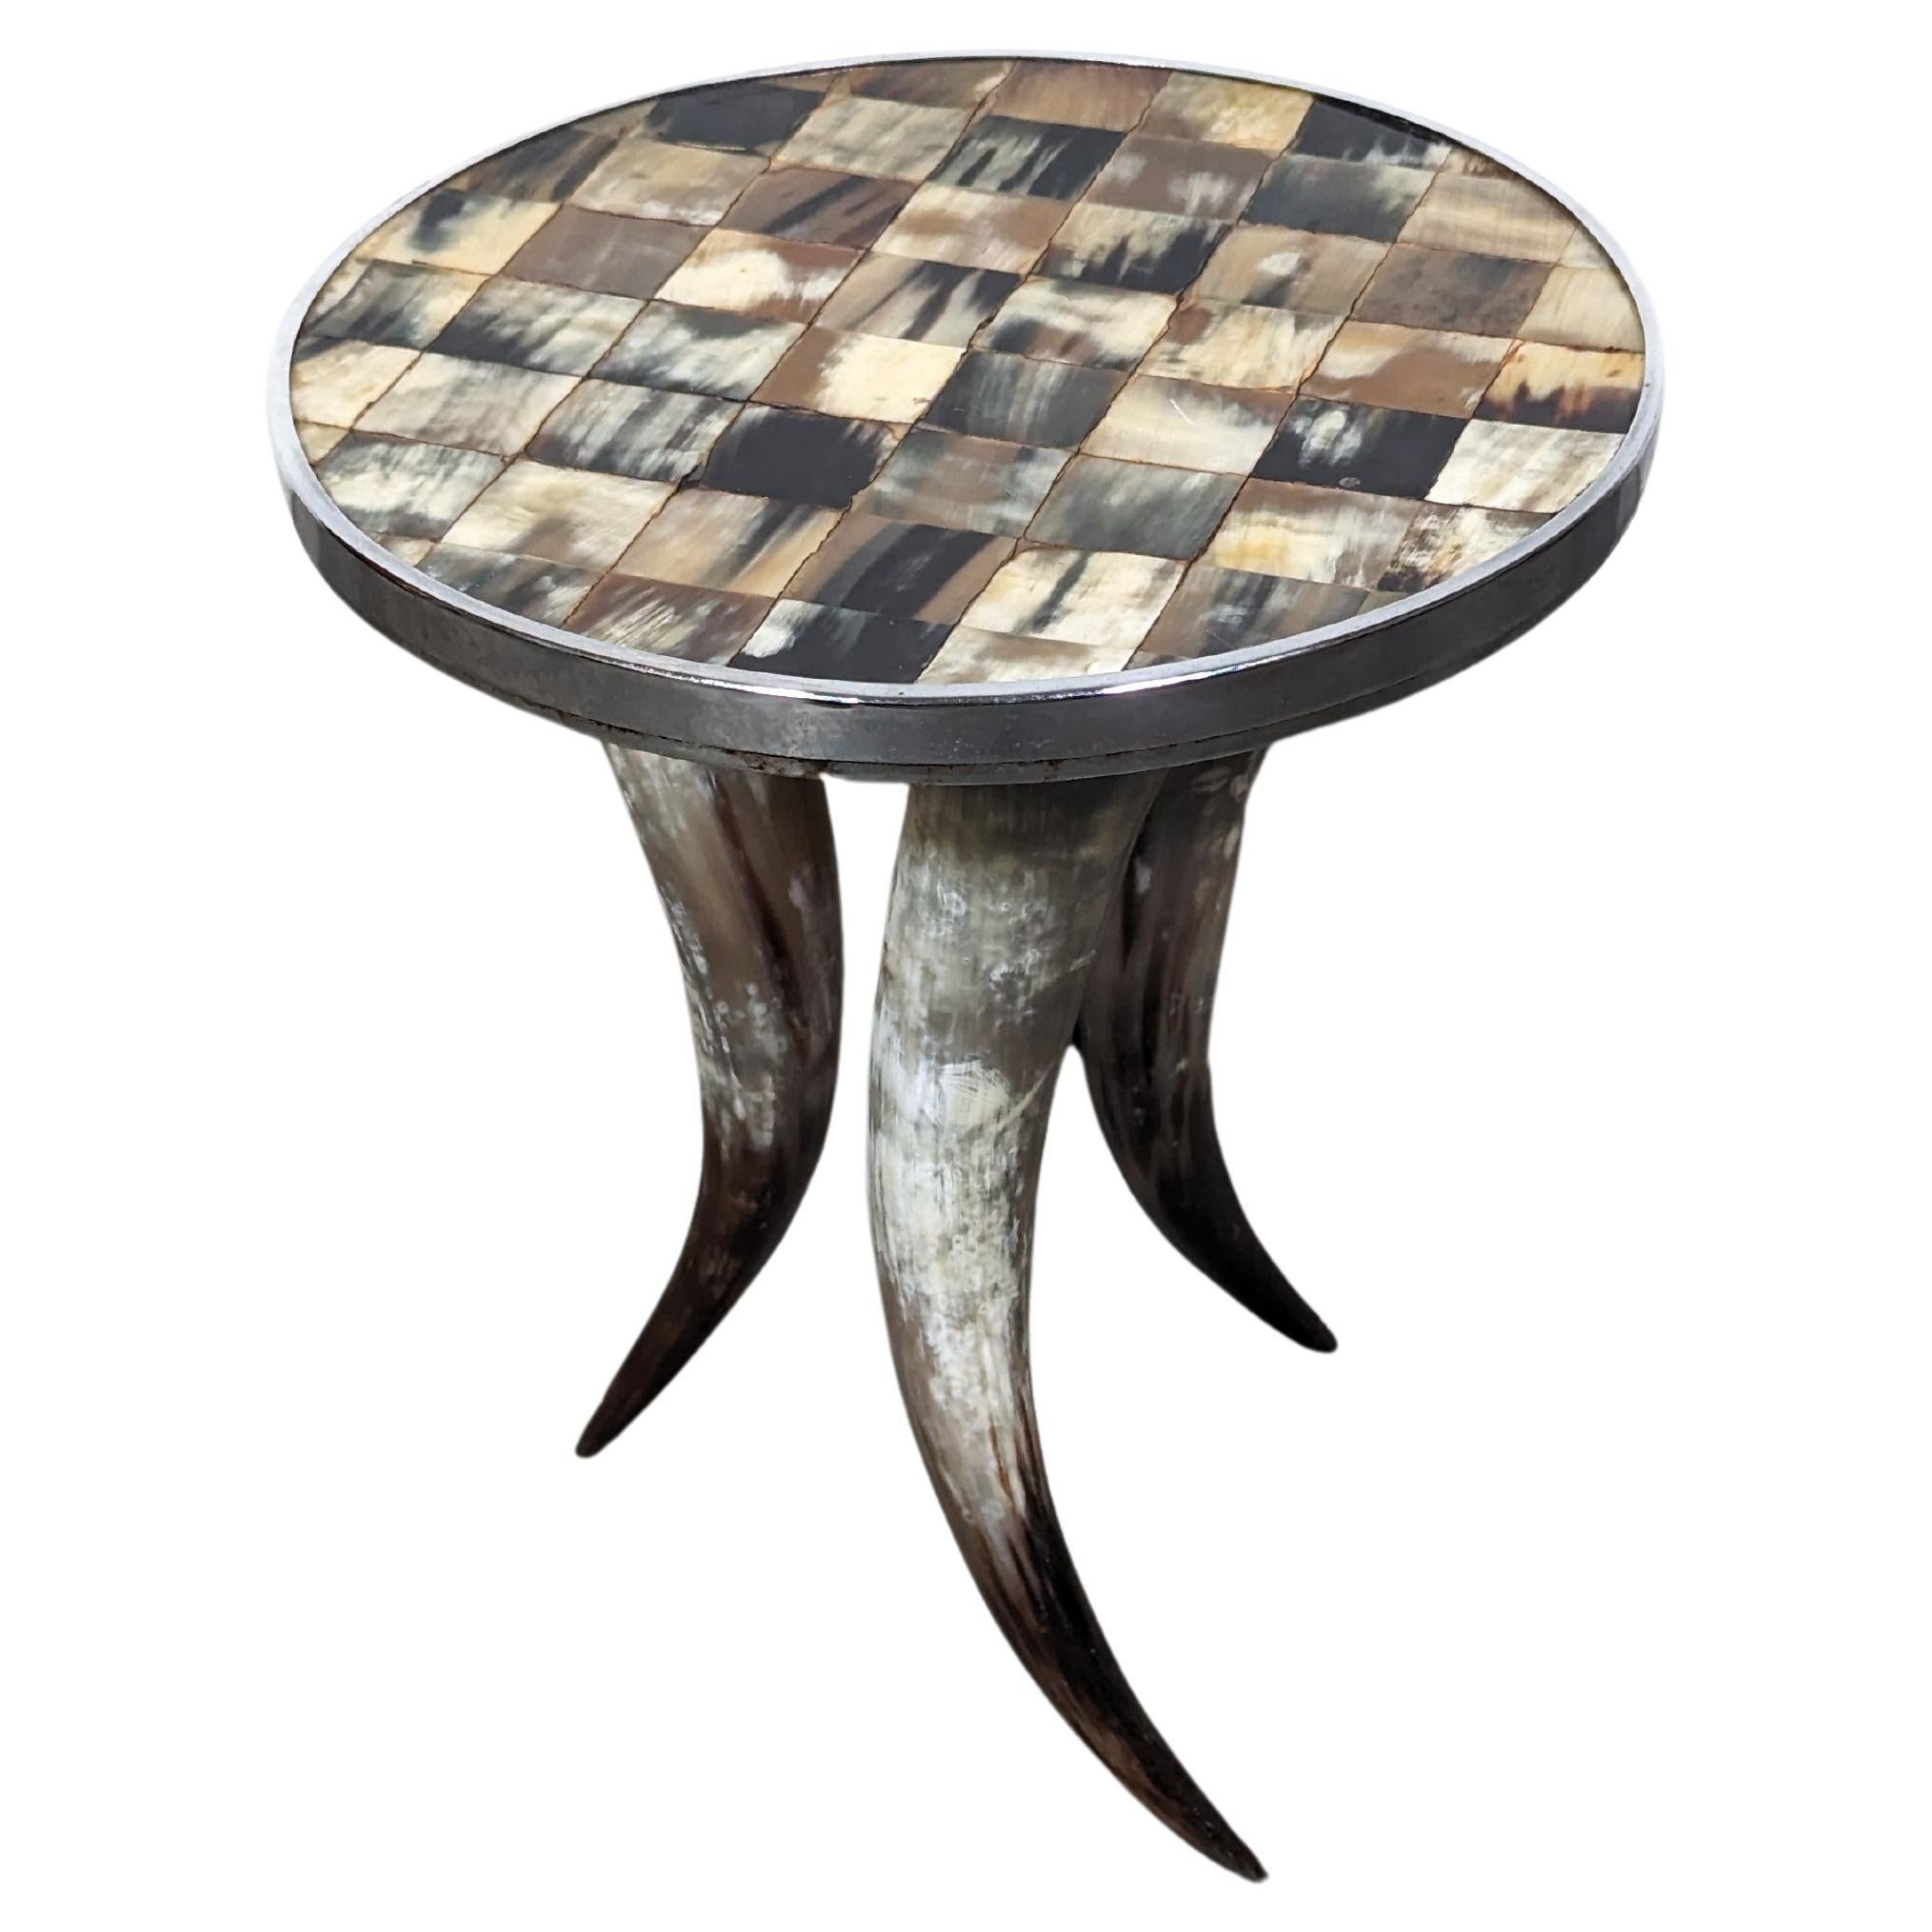 Vintage Tri Legged Horn Side End Table with Tiled Top, c1990s